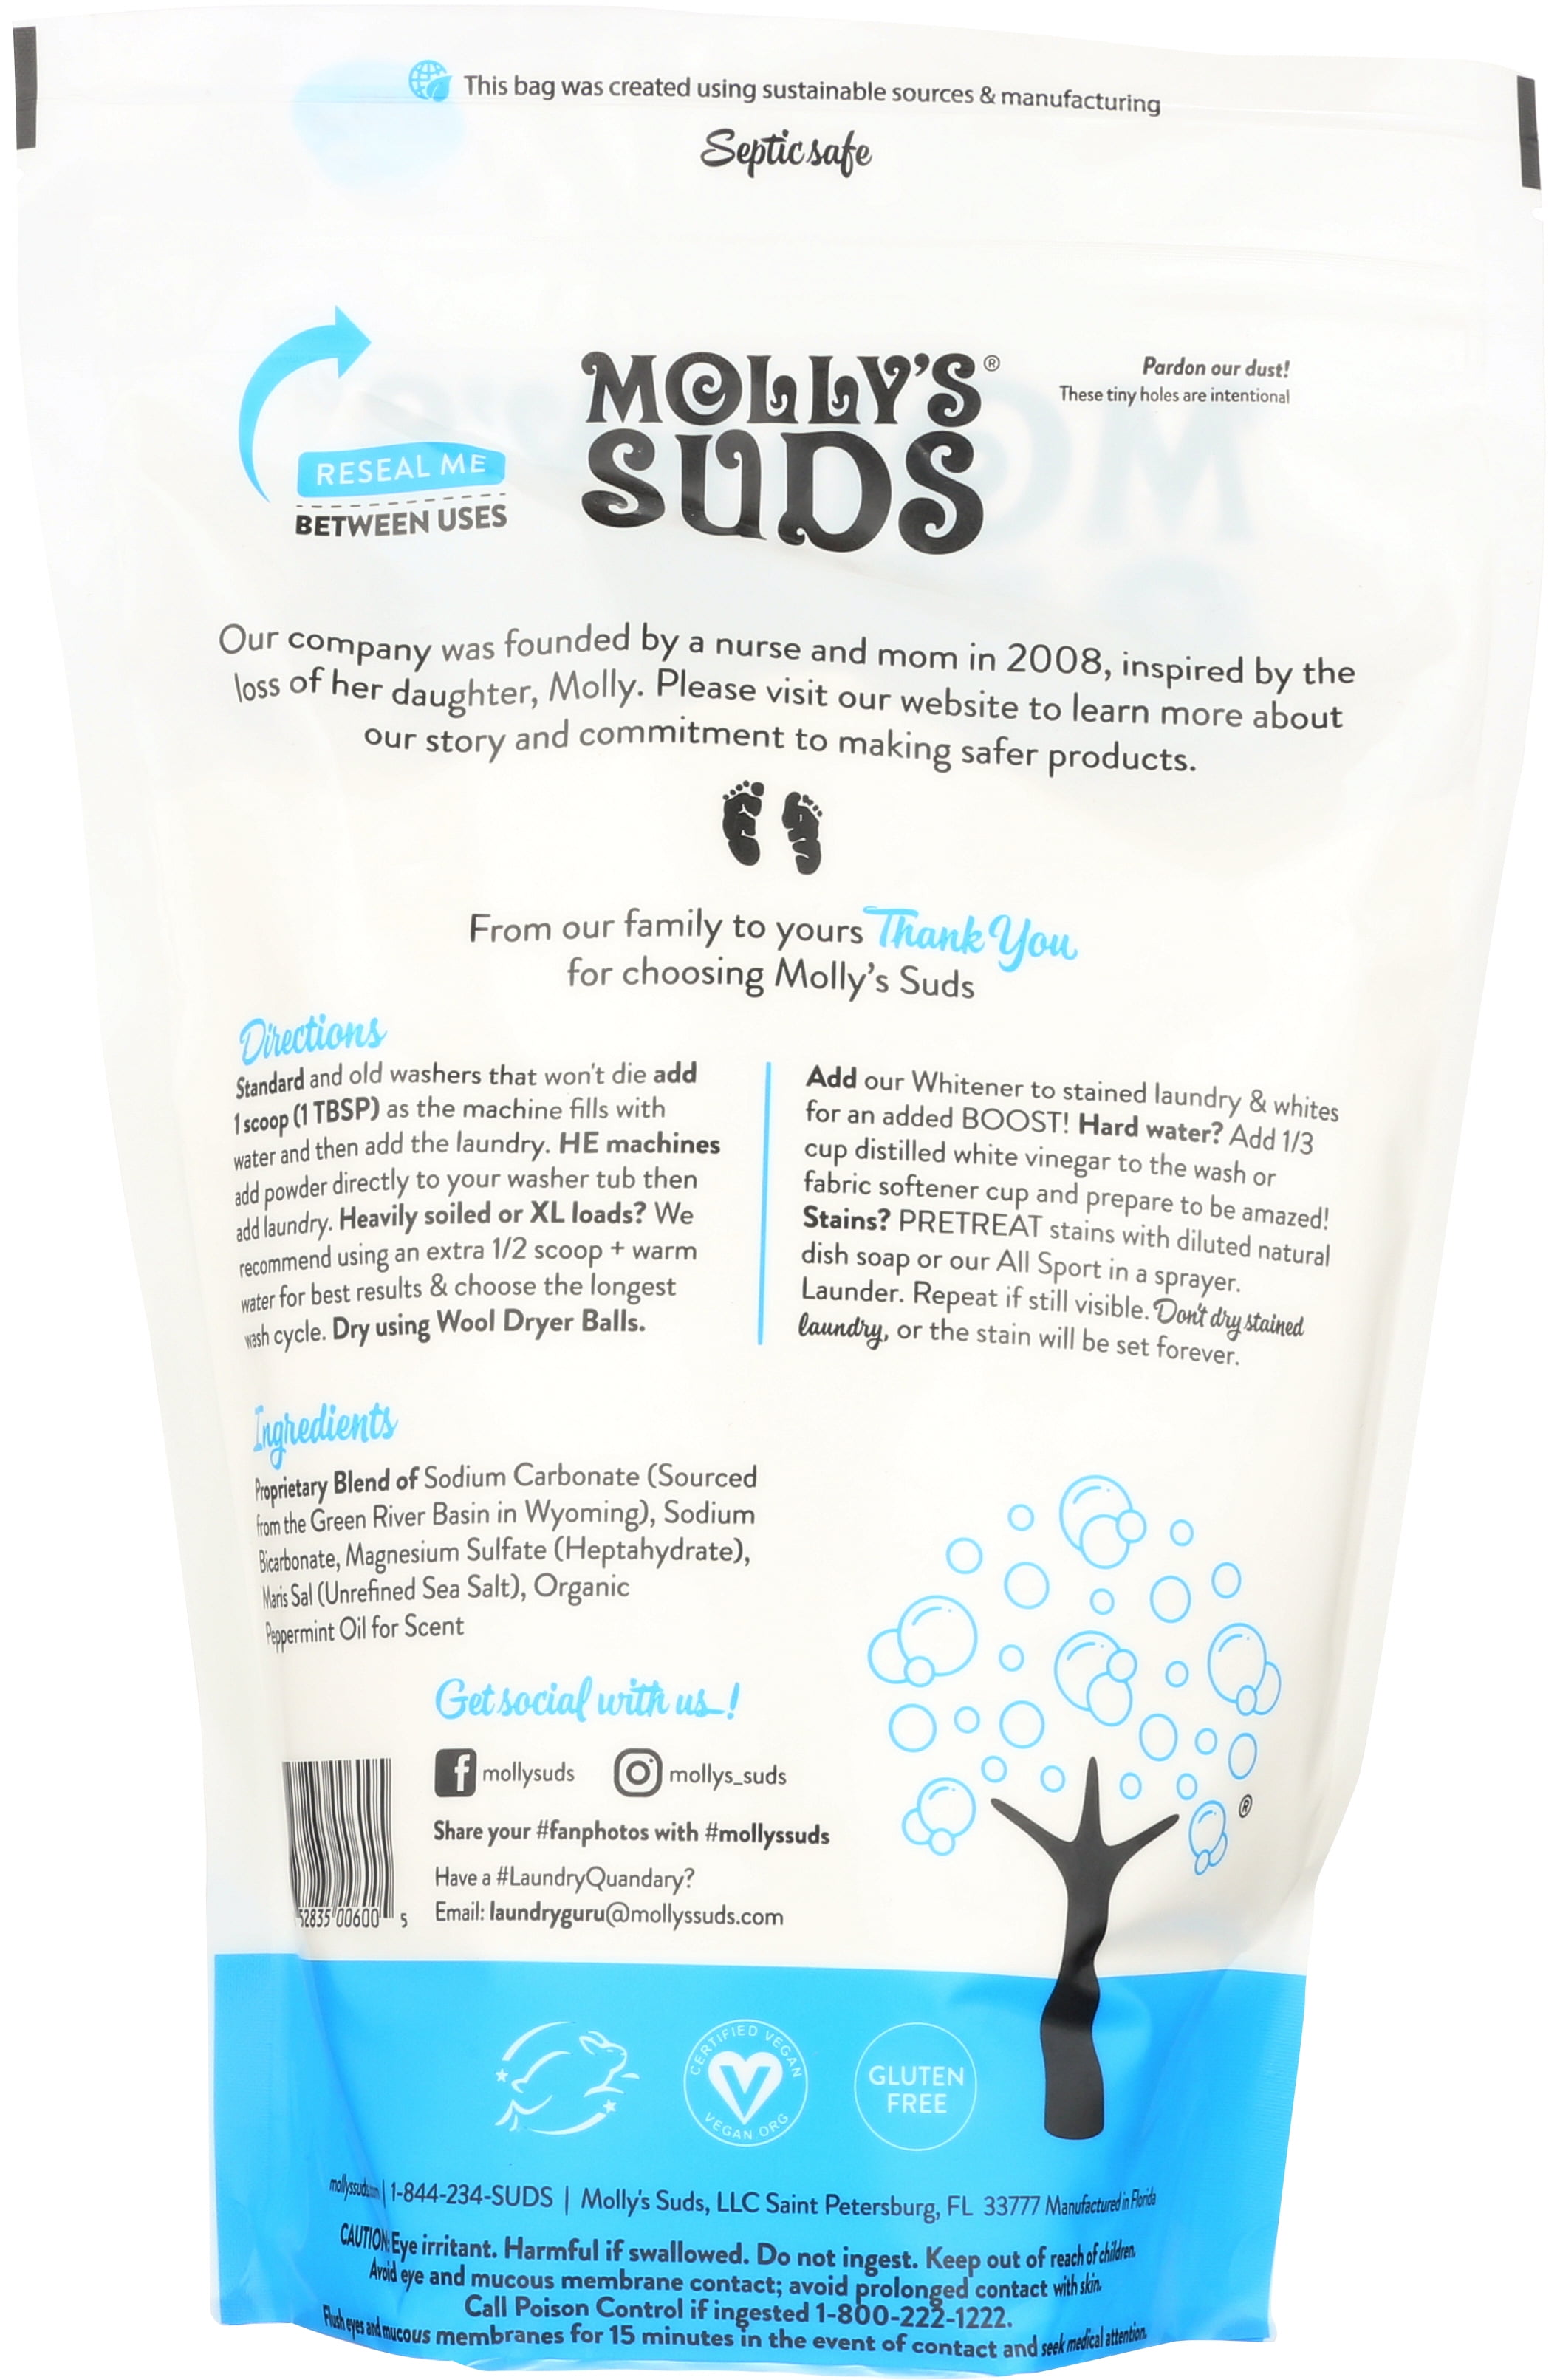 Mollys Suds Laundry Powder, Ultra-Concentrated - 41.8 oz